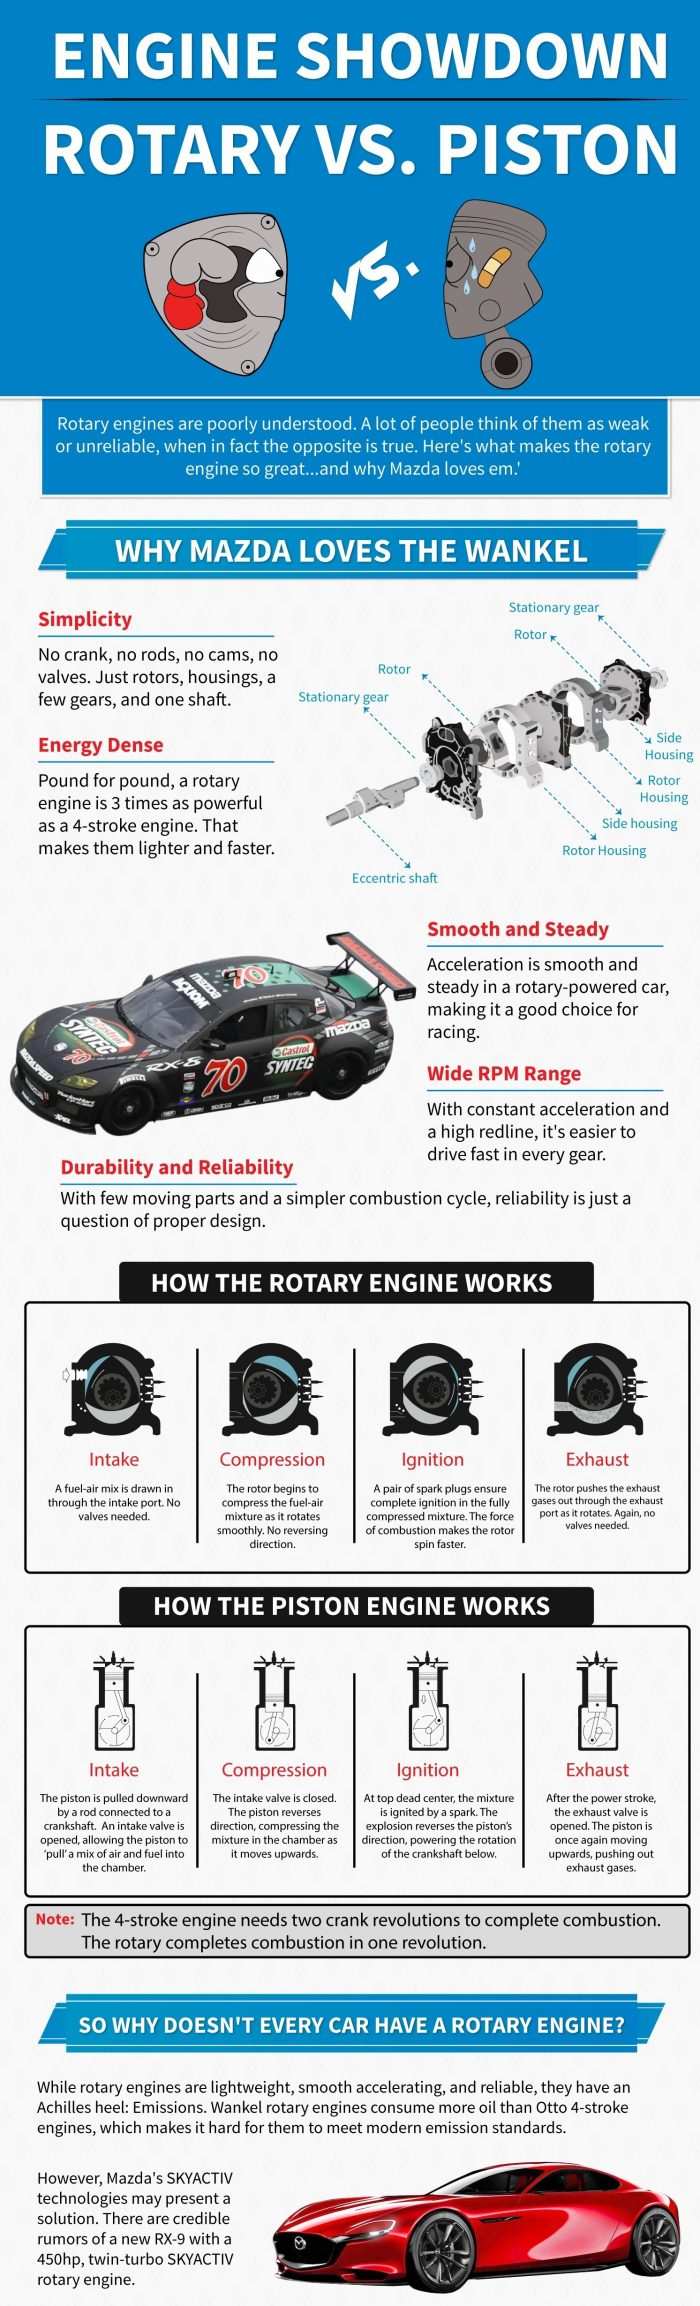 How does a rotary engine work?